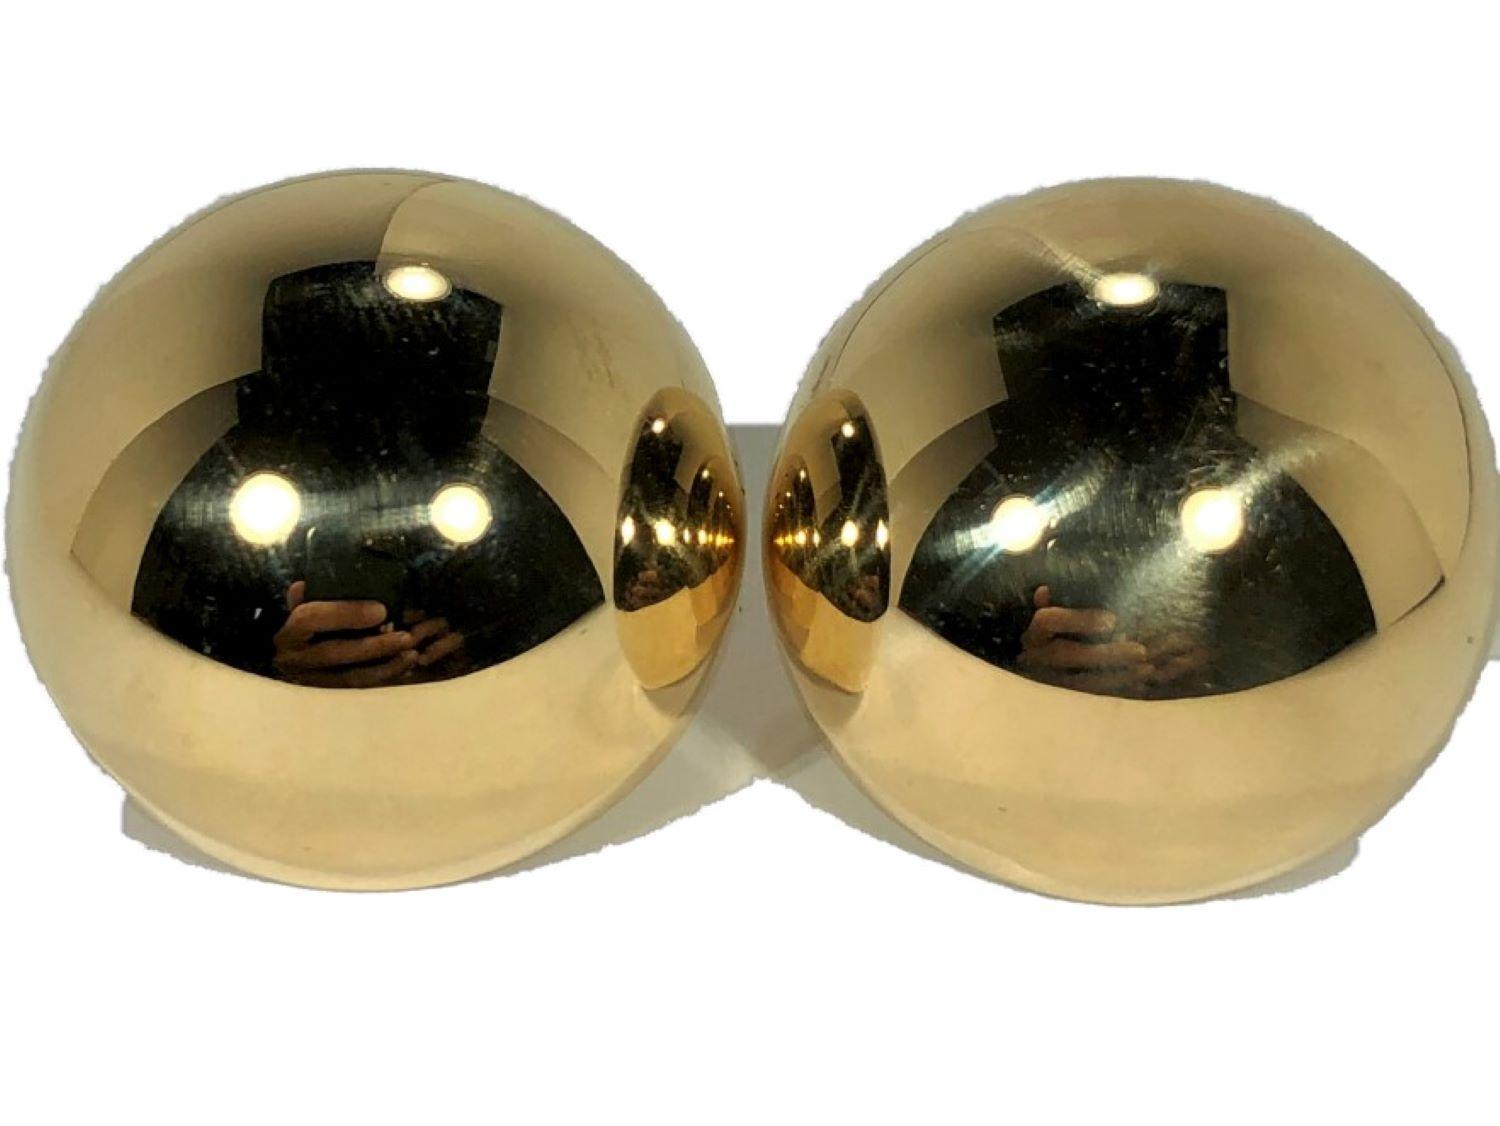 These extra large, vintage, 14k yellow gold dome earrings are similar to other earrings of this style with one notable exception. They are enormous, measuring a full 1 1/4 inches in diameter and 3/4 inches high at their apex. High polish finish.